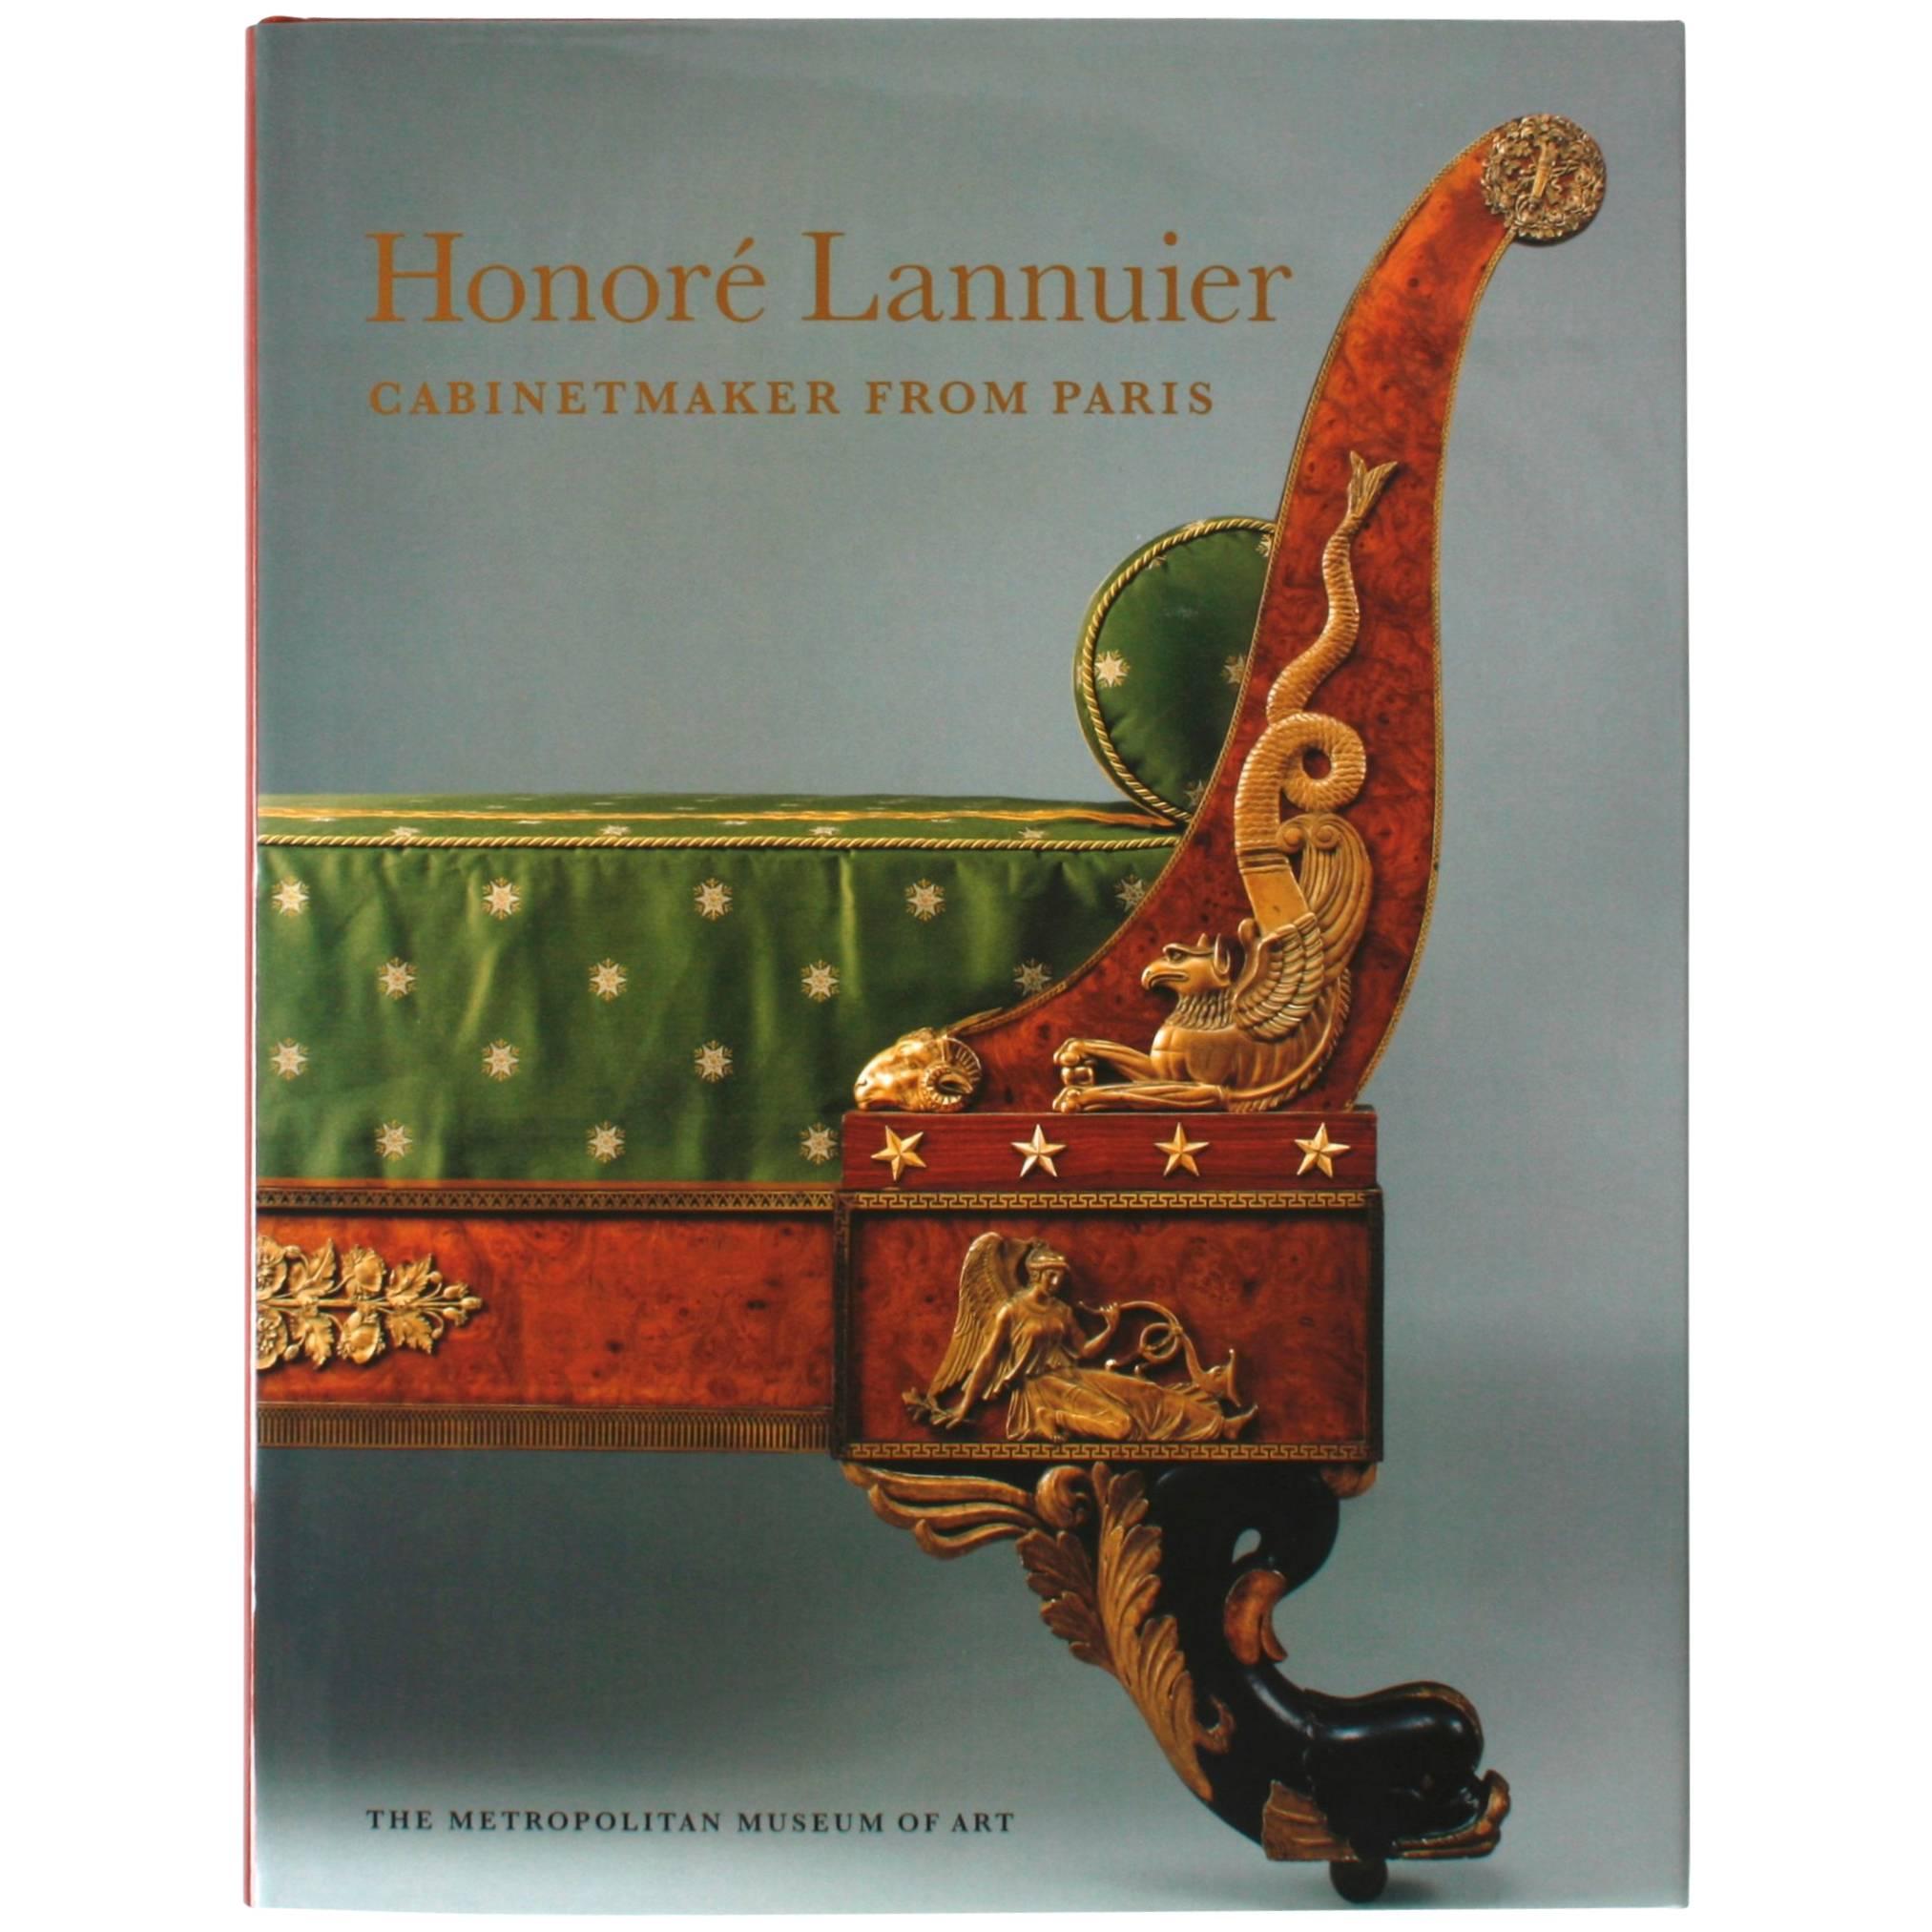 Honoré Lannuier Cabinetmaker from Paris: The Life and Work of a French Ébéniste For Sale